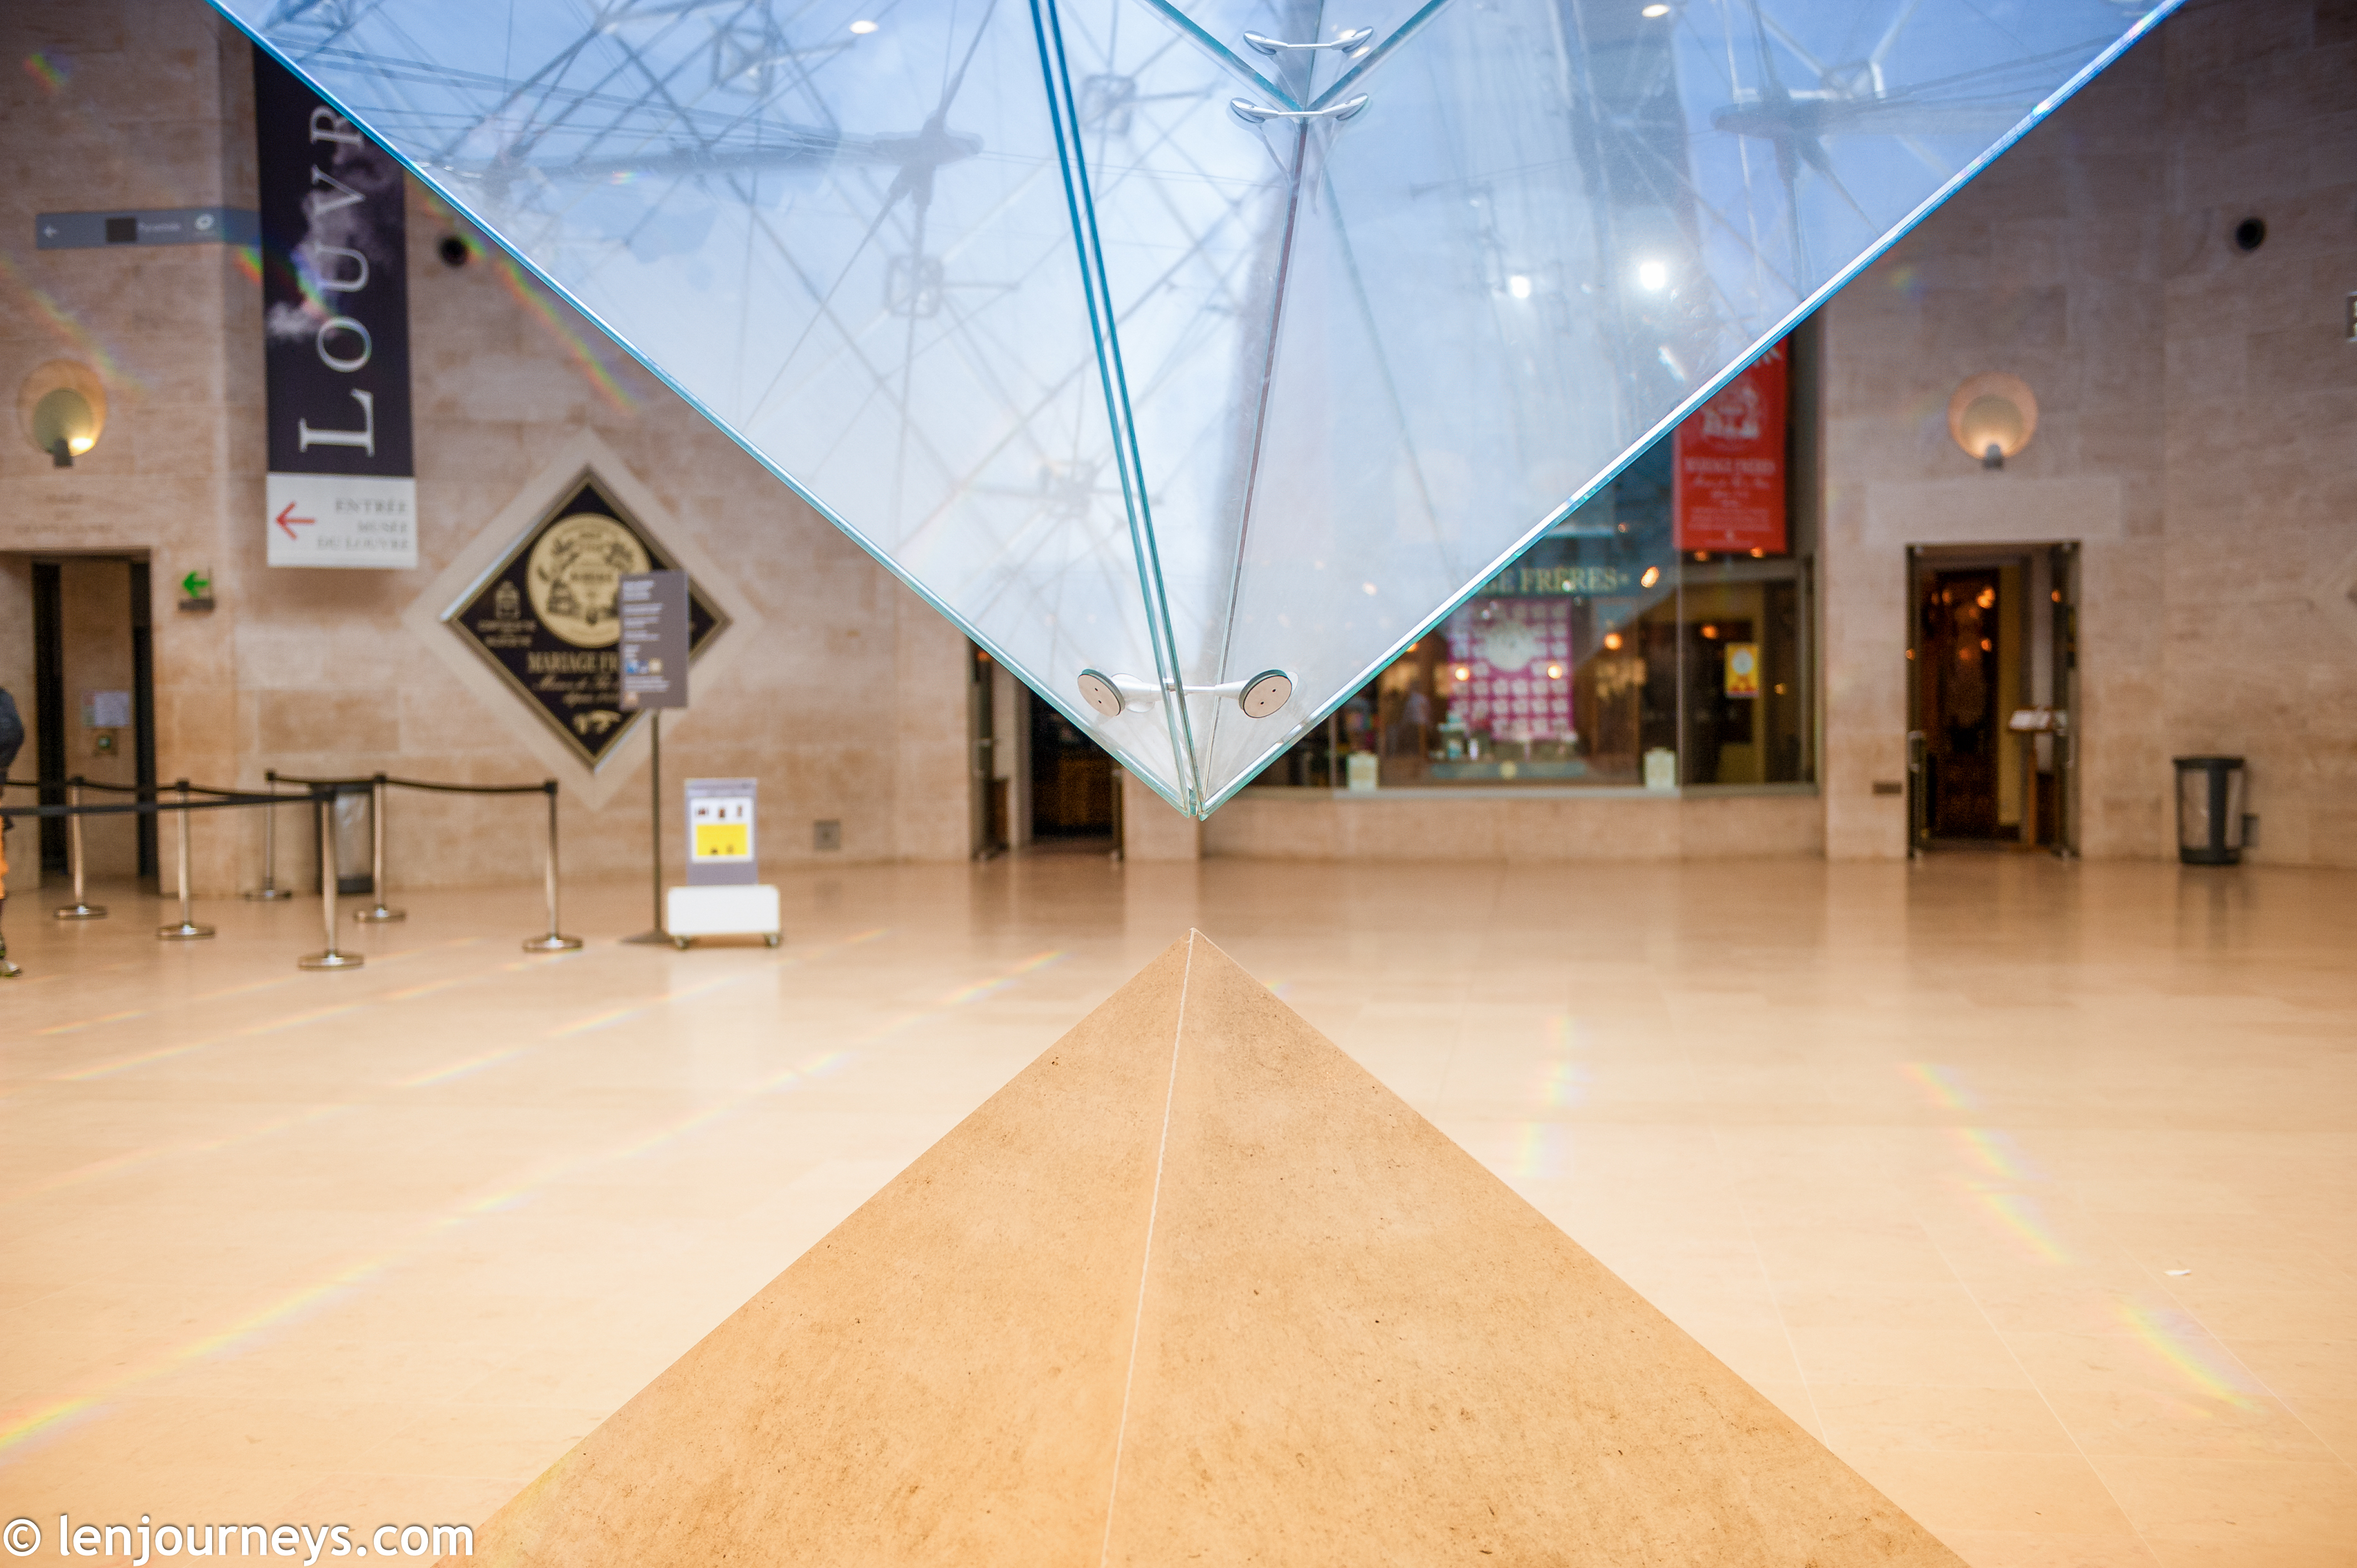 The reverse pyramid in the Louvre Museum